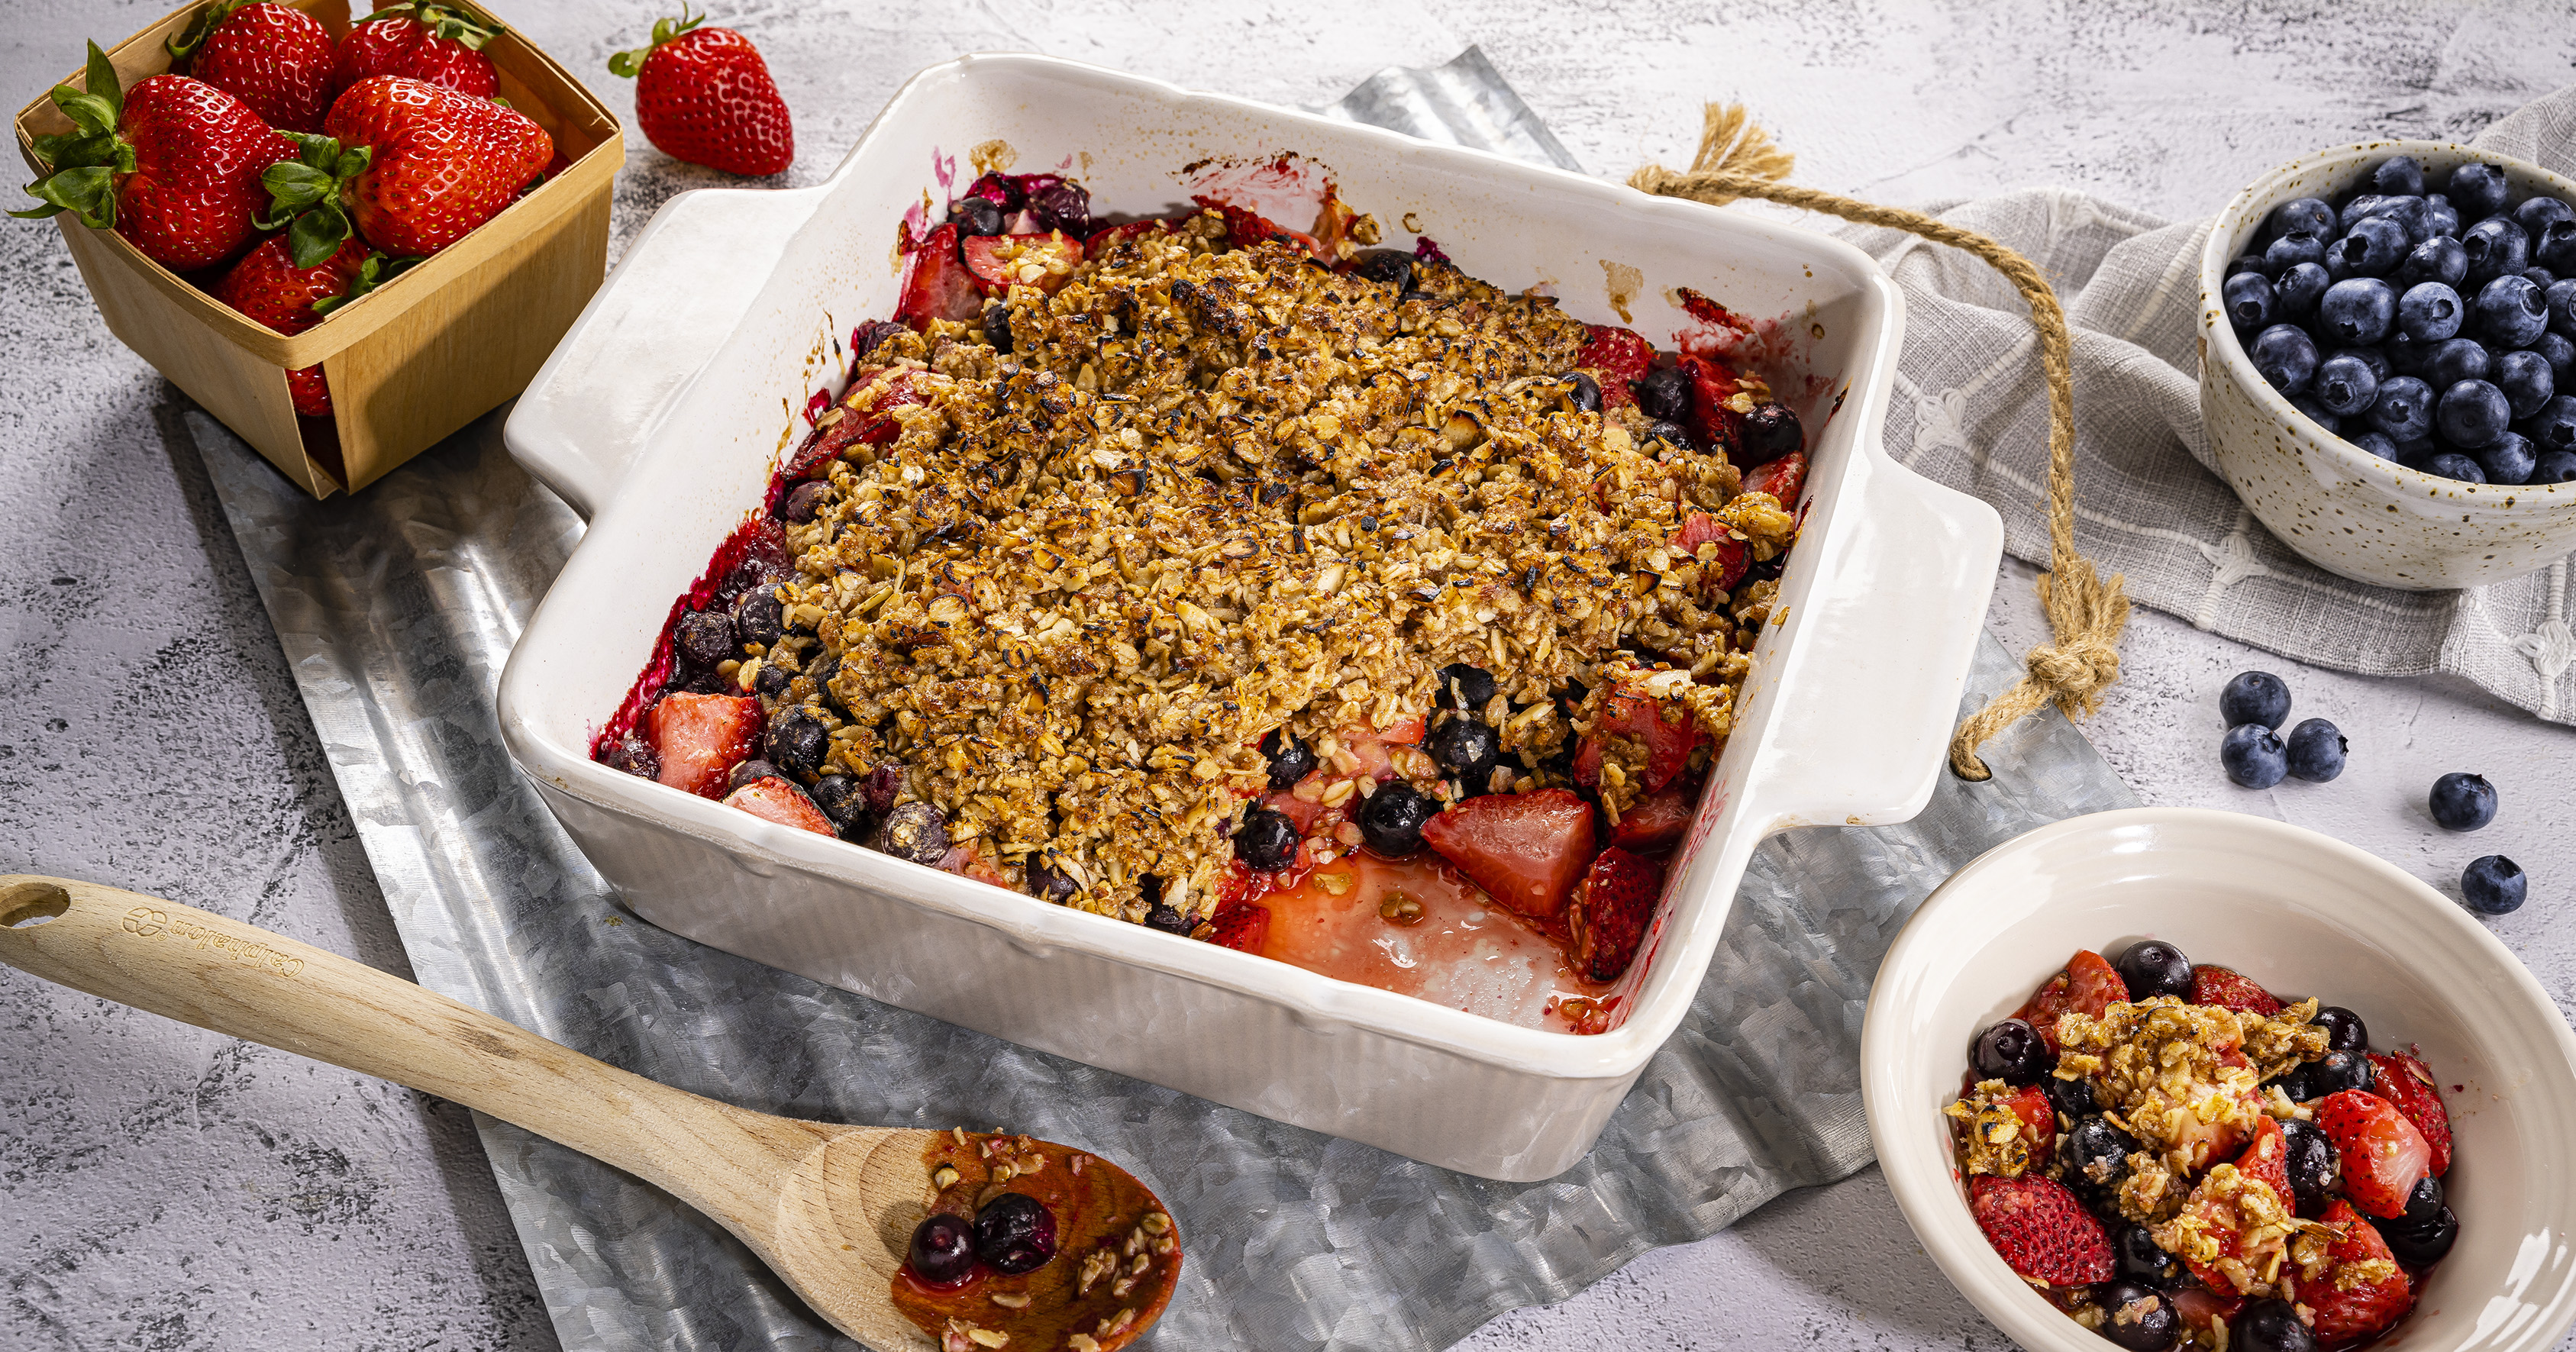 Grilled Strawberry Blueberry Crumble